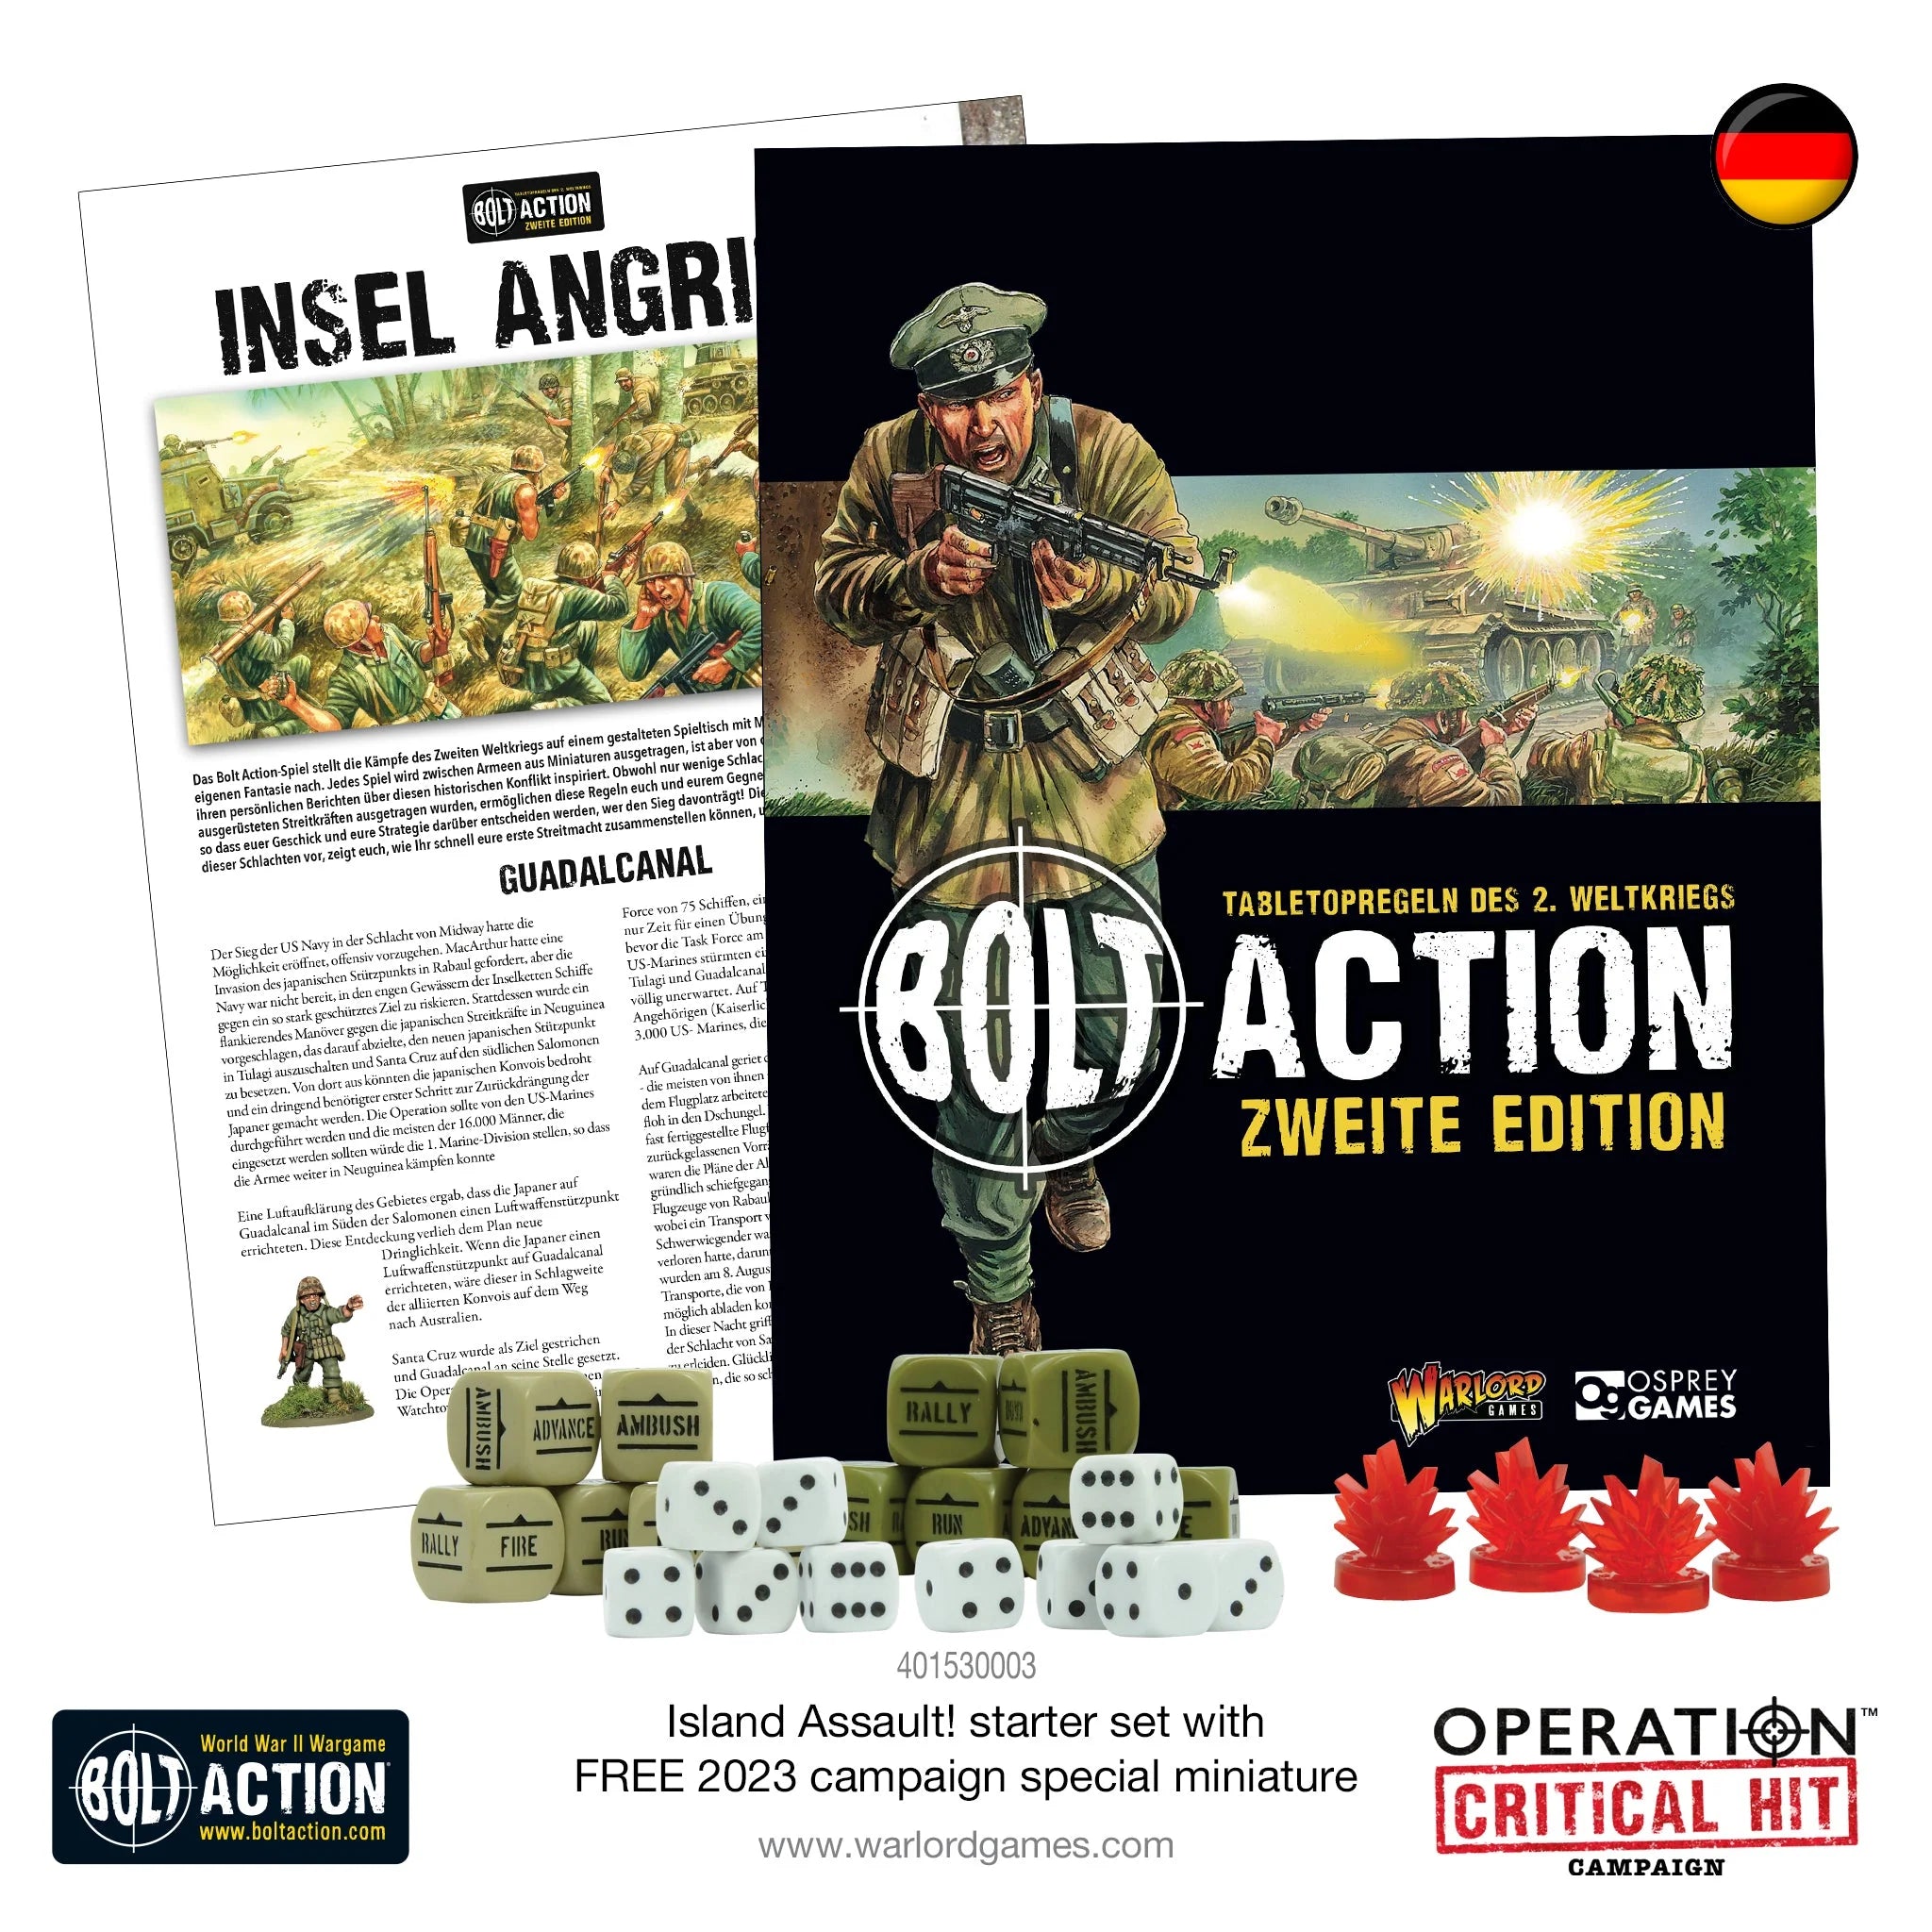 Bolt Action Redcap Royal Military Police (Operation Critical Hit